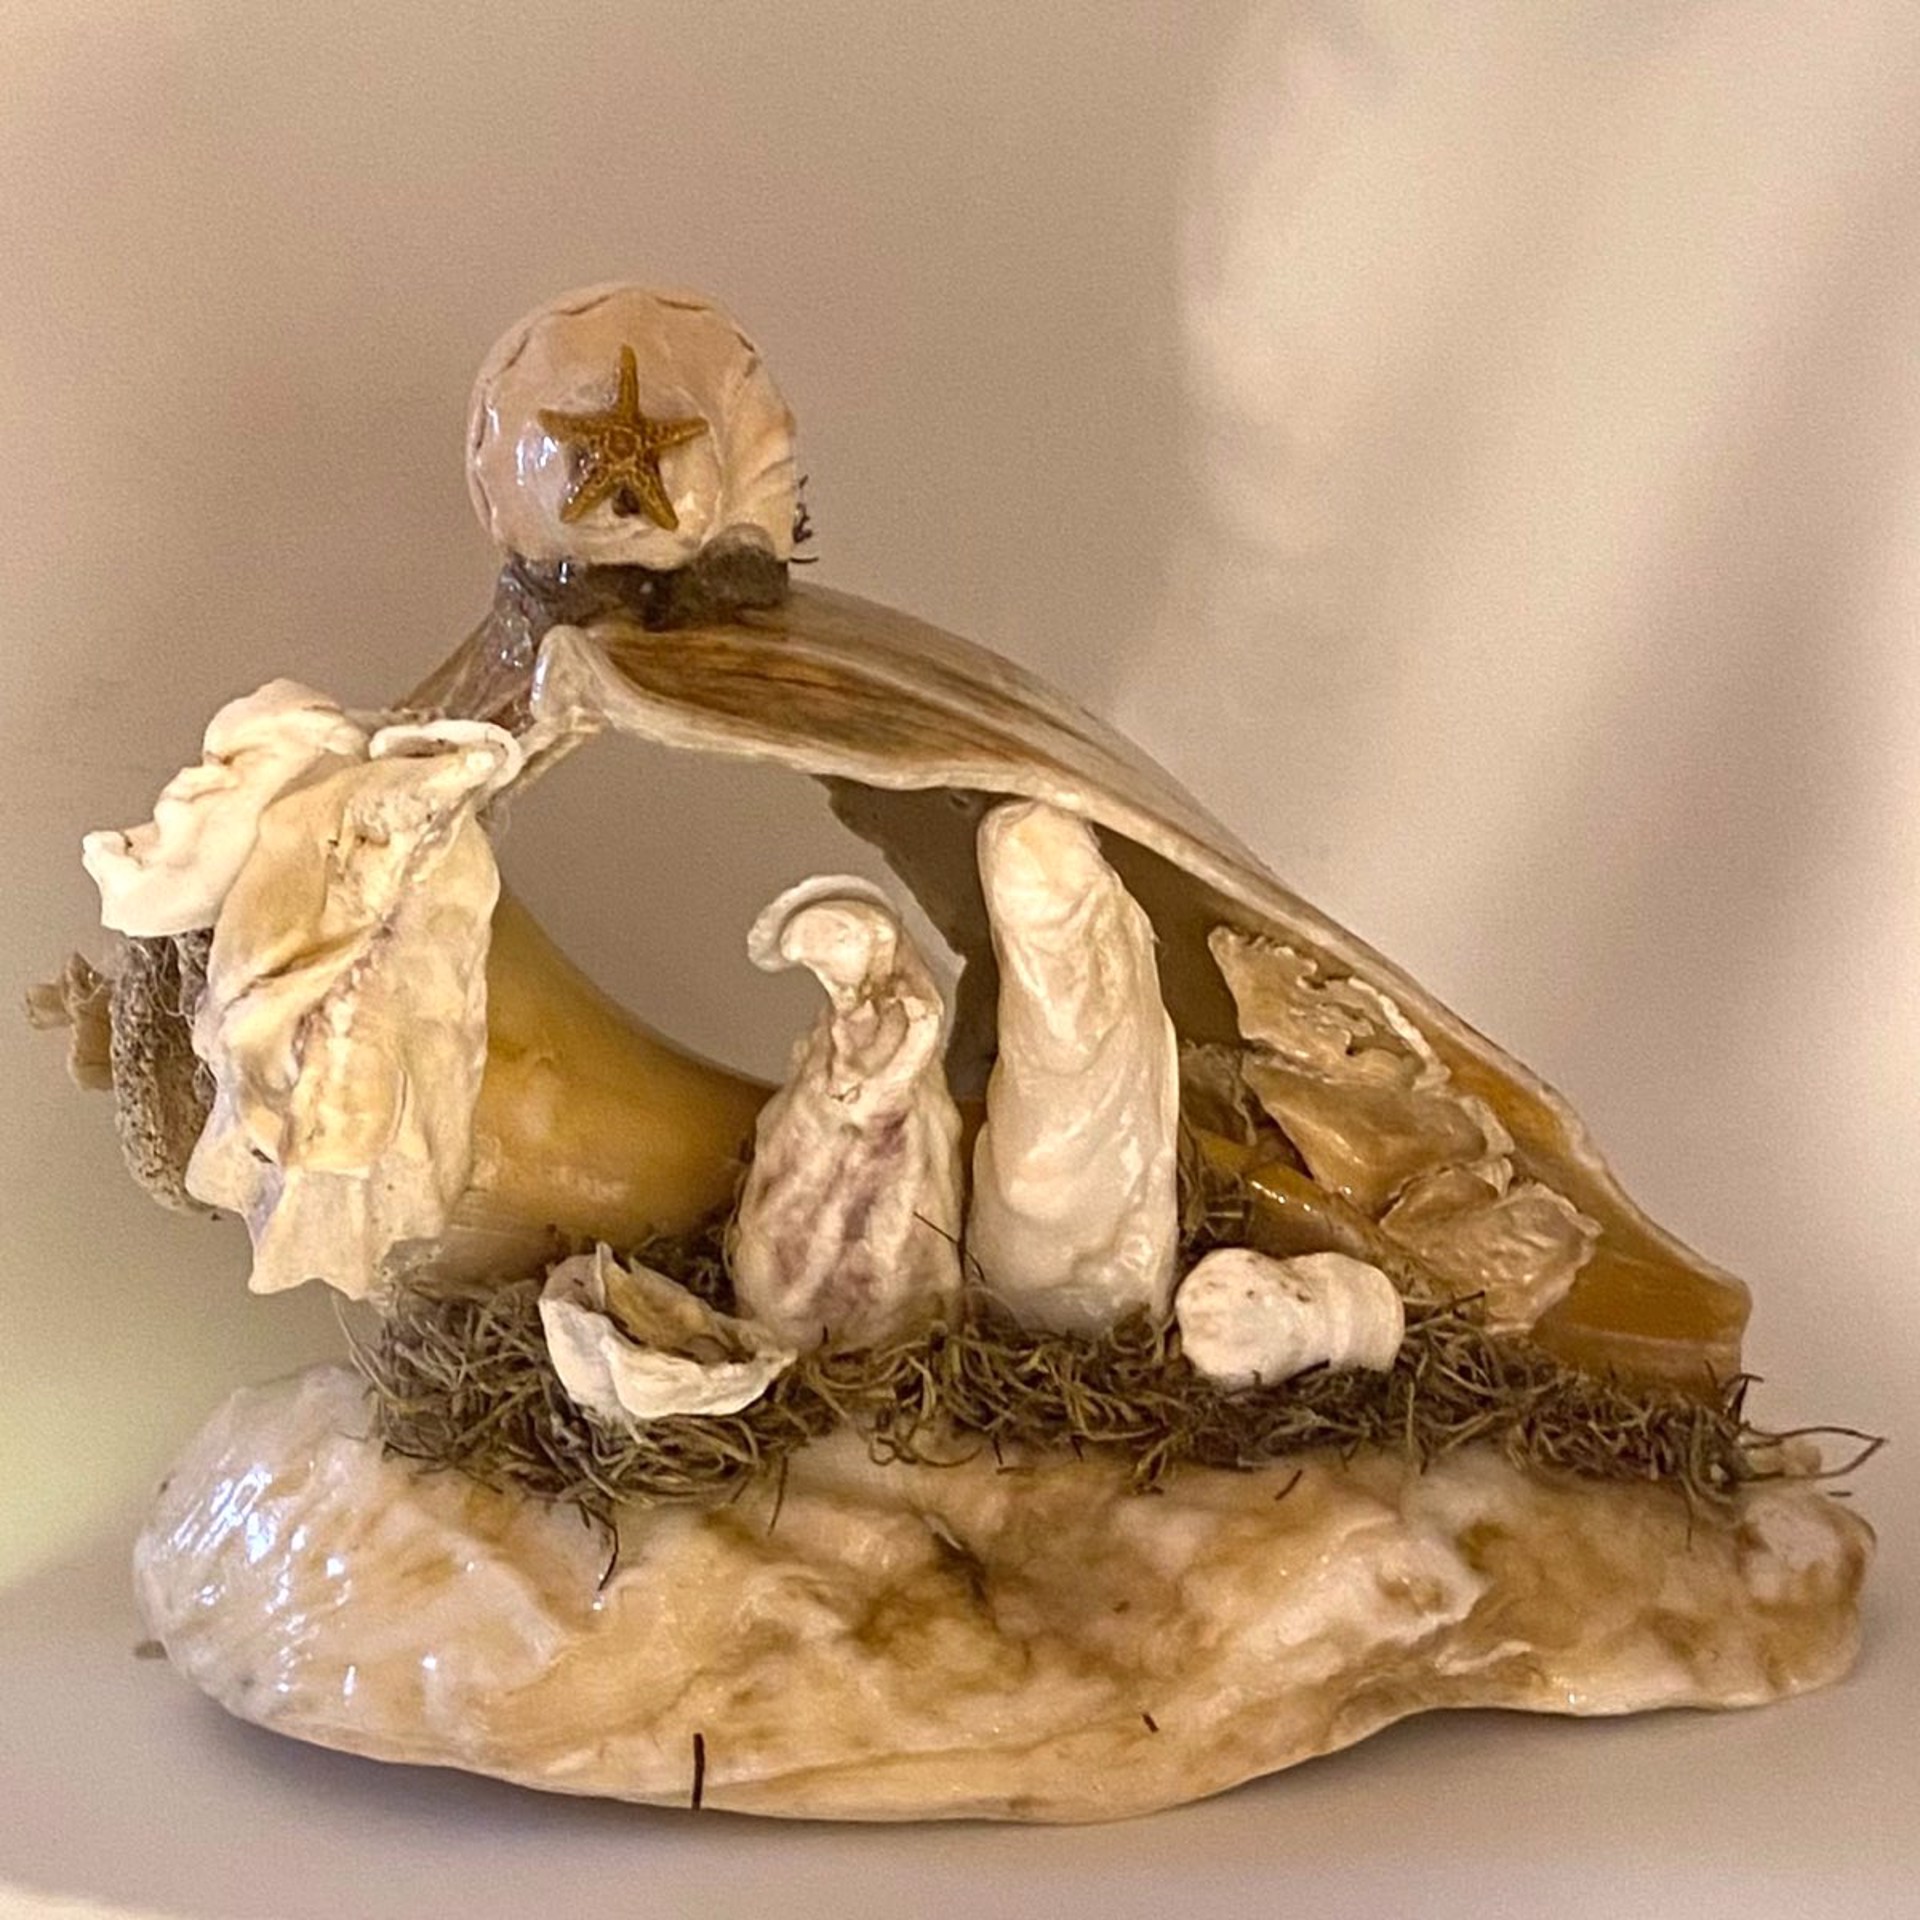 CN22-47 Crèche from the Sea -Whelk On Large Oyster Shell by Chris Nietert